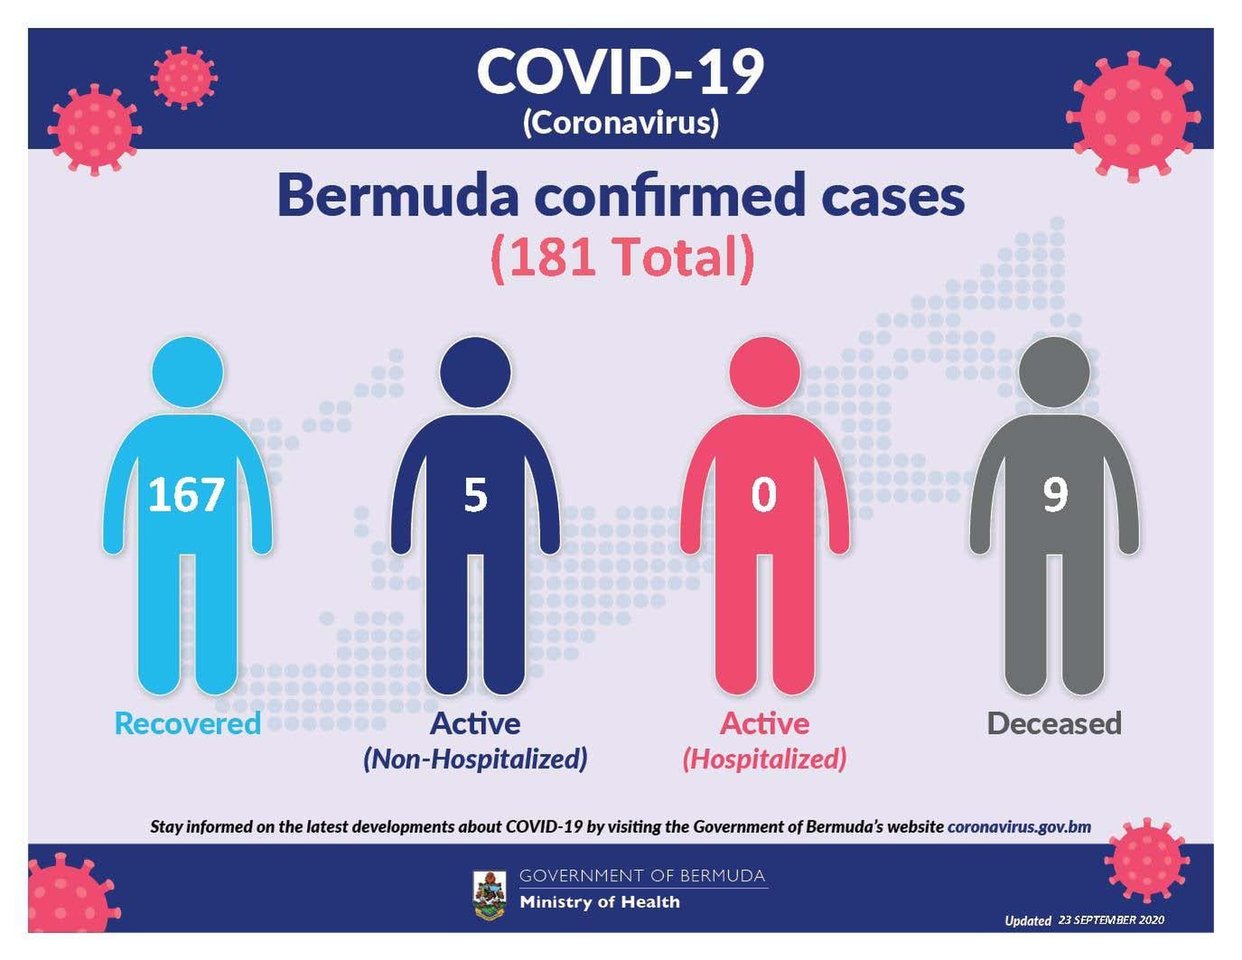 No new COVID-19 cases reported in Bermuda, 23 September